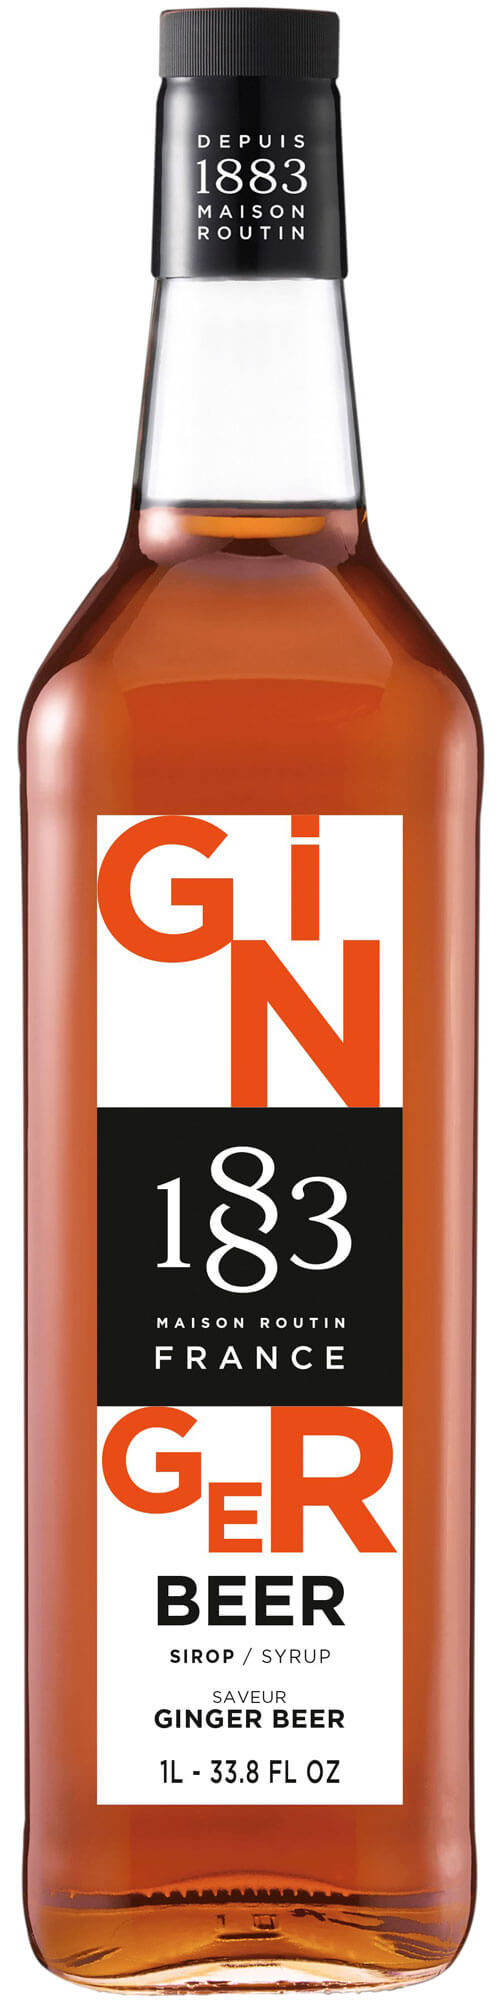 Ginger Beer - Maison Routin 1883 syrup (1,0l)